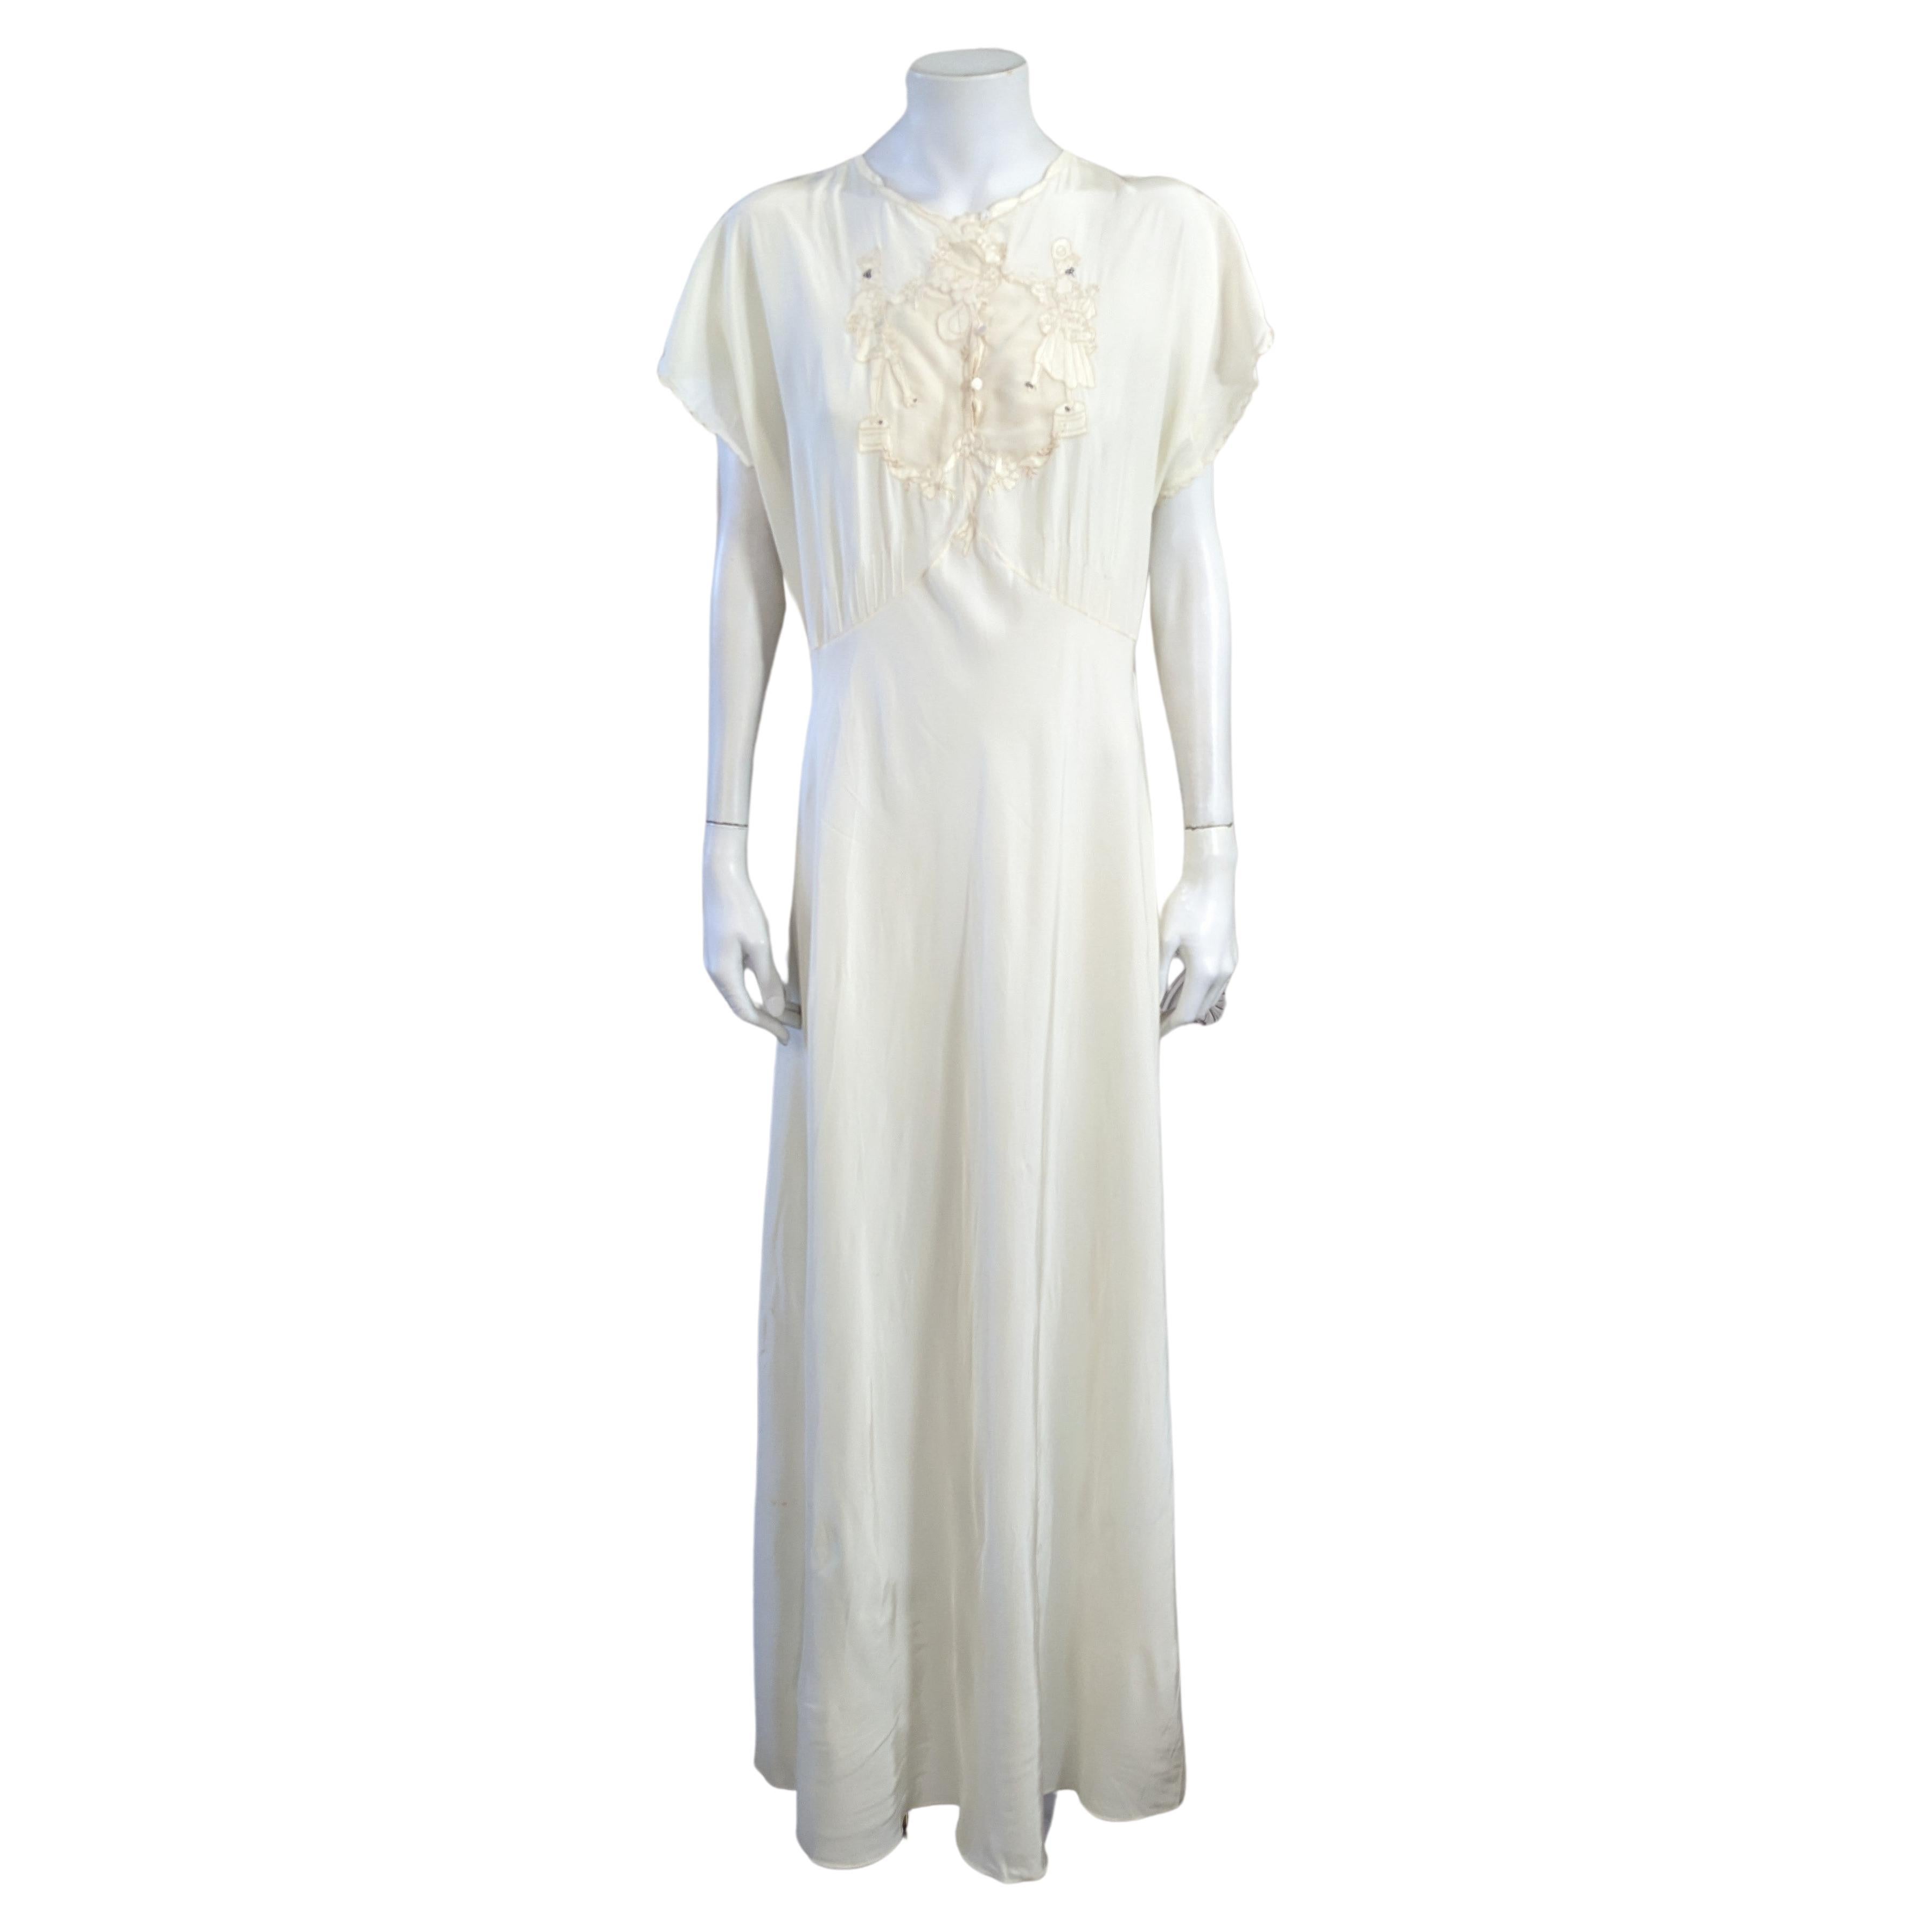 Charming Ivory Slip Dress, 18th Century Courtesan Embroideries For Sale